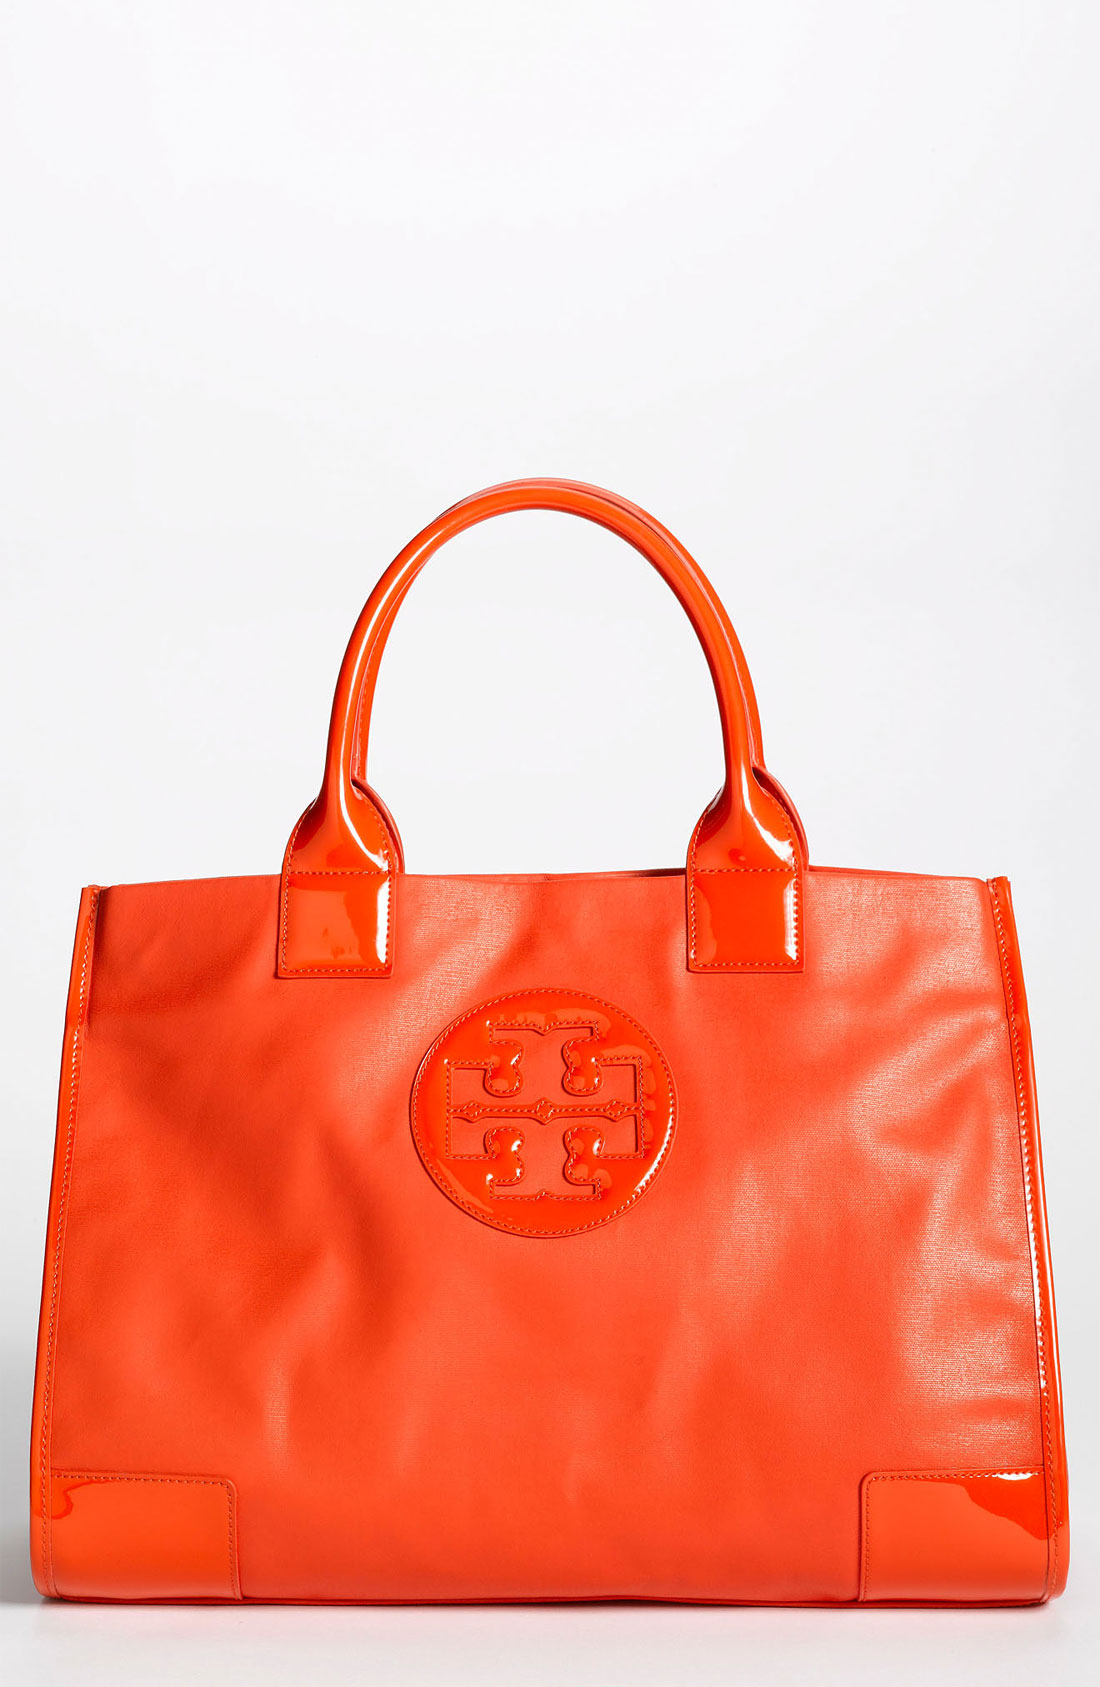 Tory burch Ella Dipped Canvas Tote Extra Large in Orange (poppy red) | Lyst